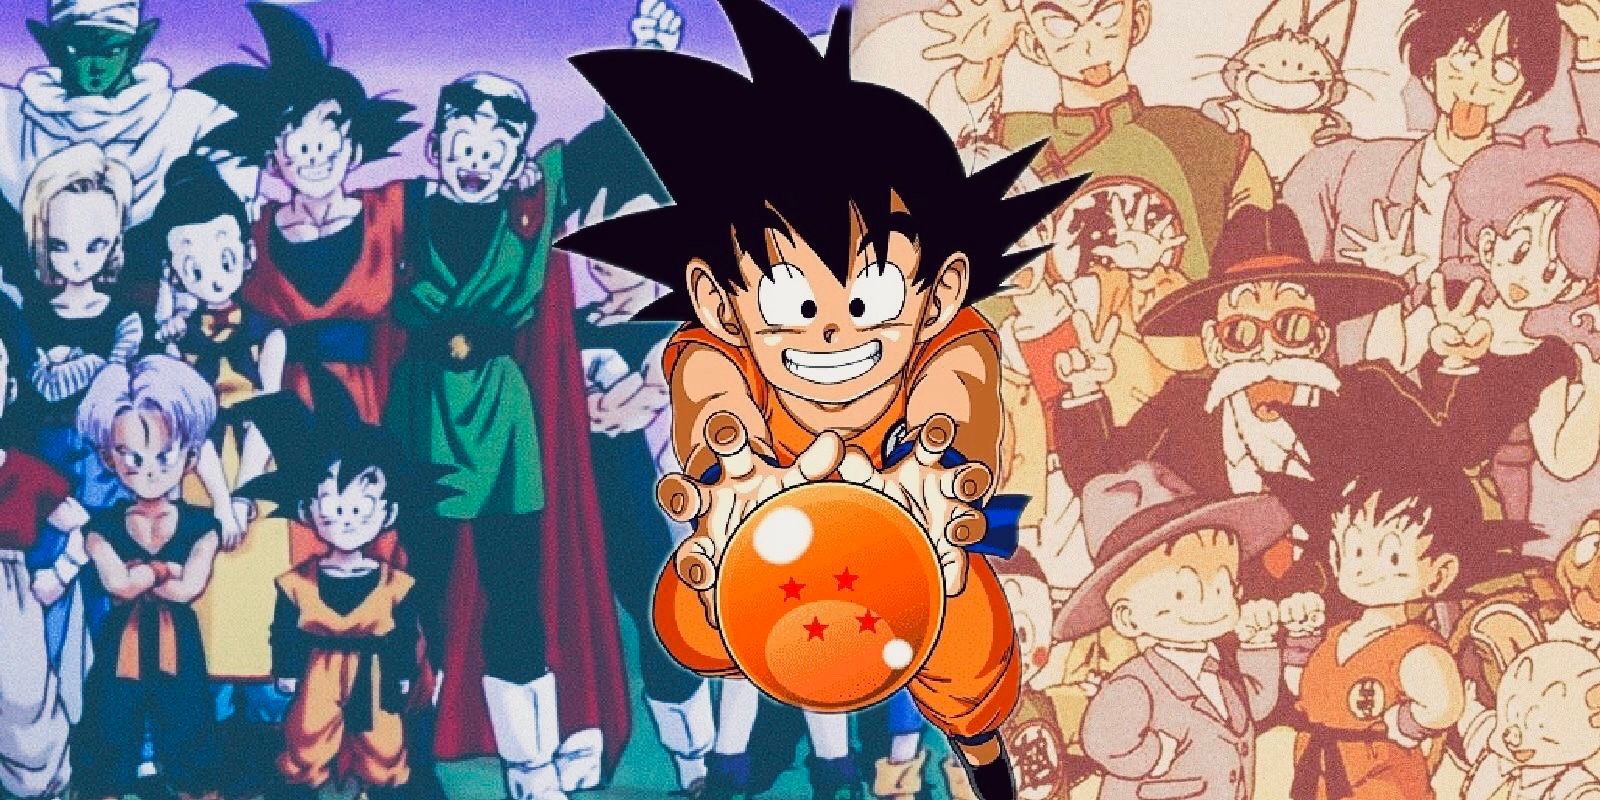 A collage of Dragon Ball and DBZ shots with Goku and his family, from kid to adult